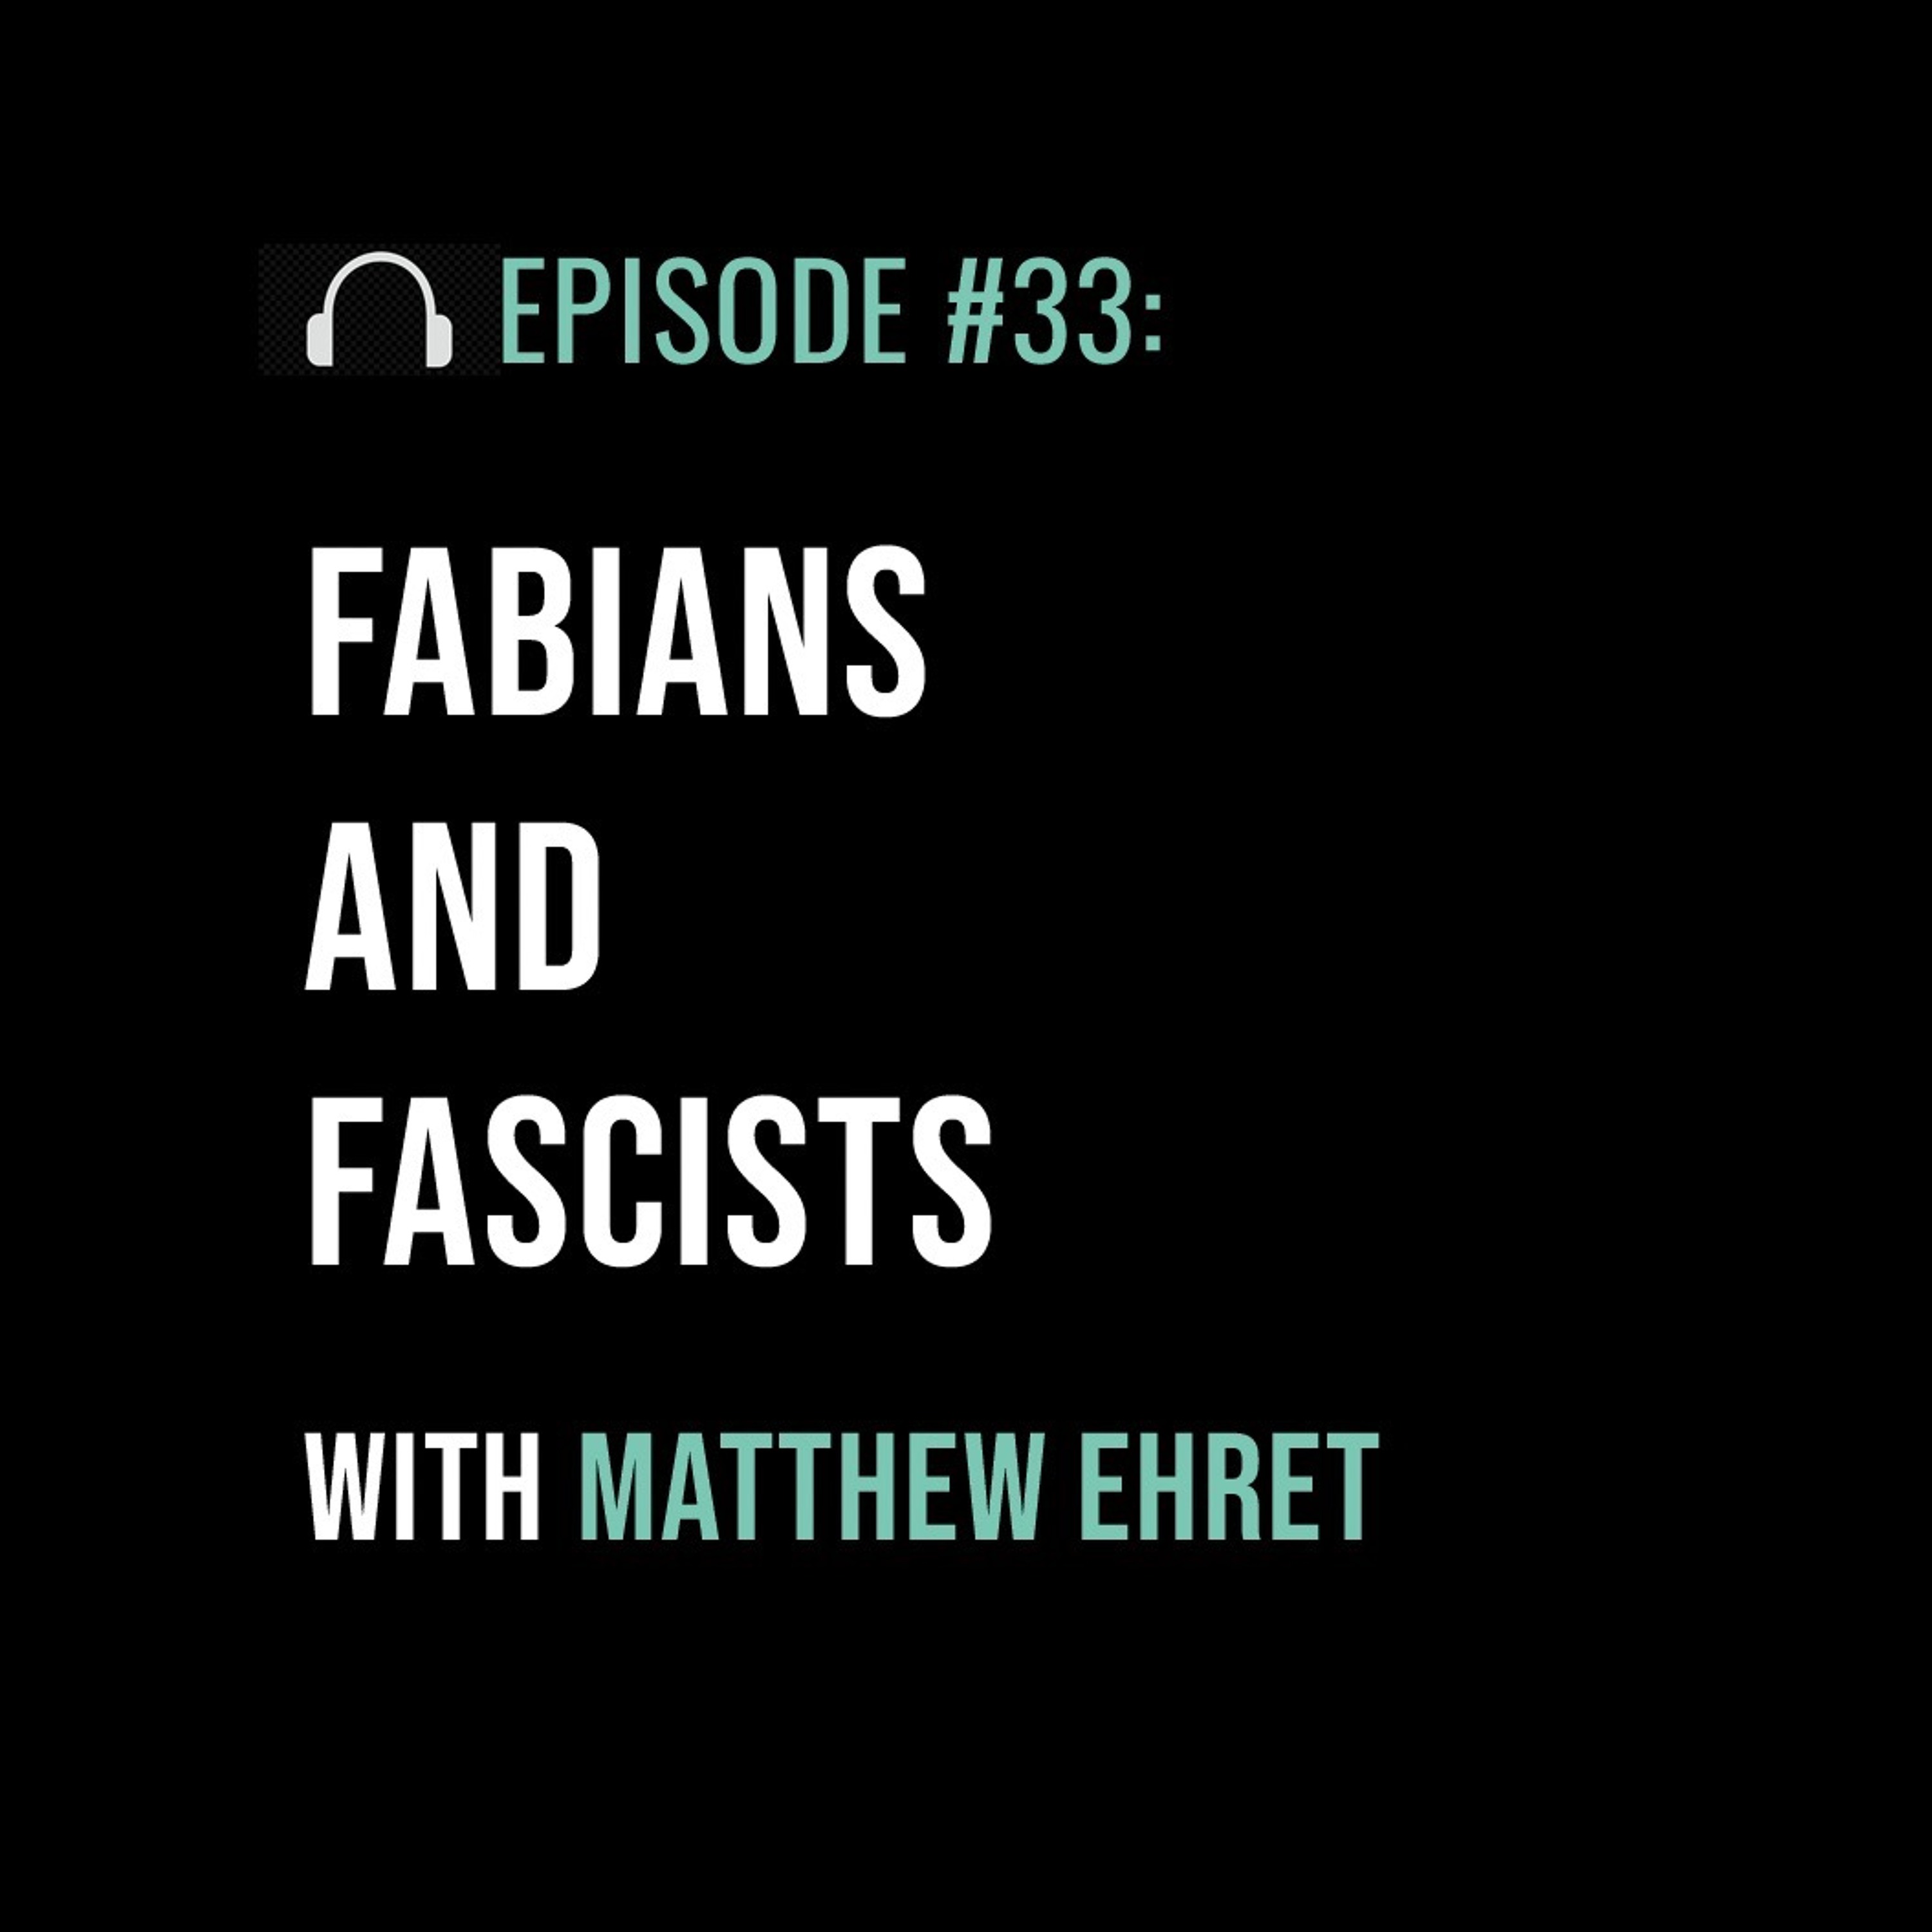 Fabians and Fascists with Matthew Ehret